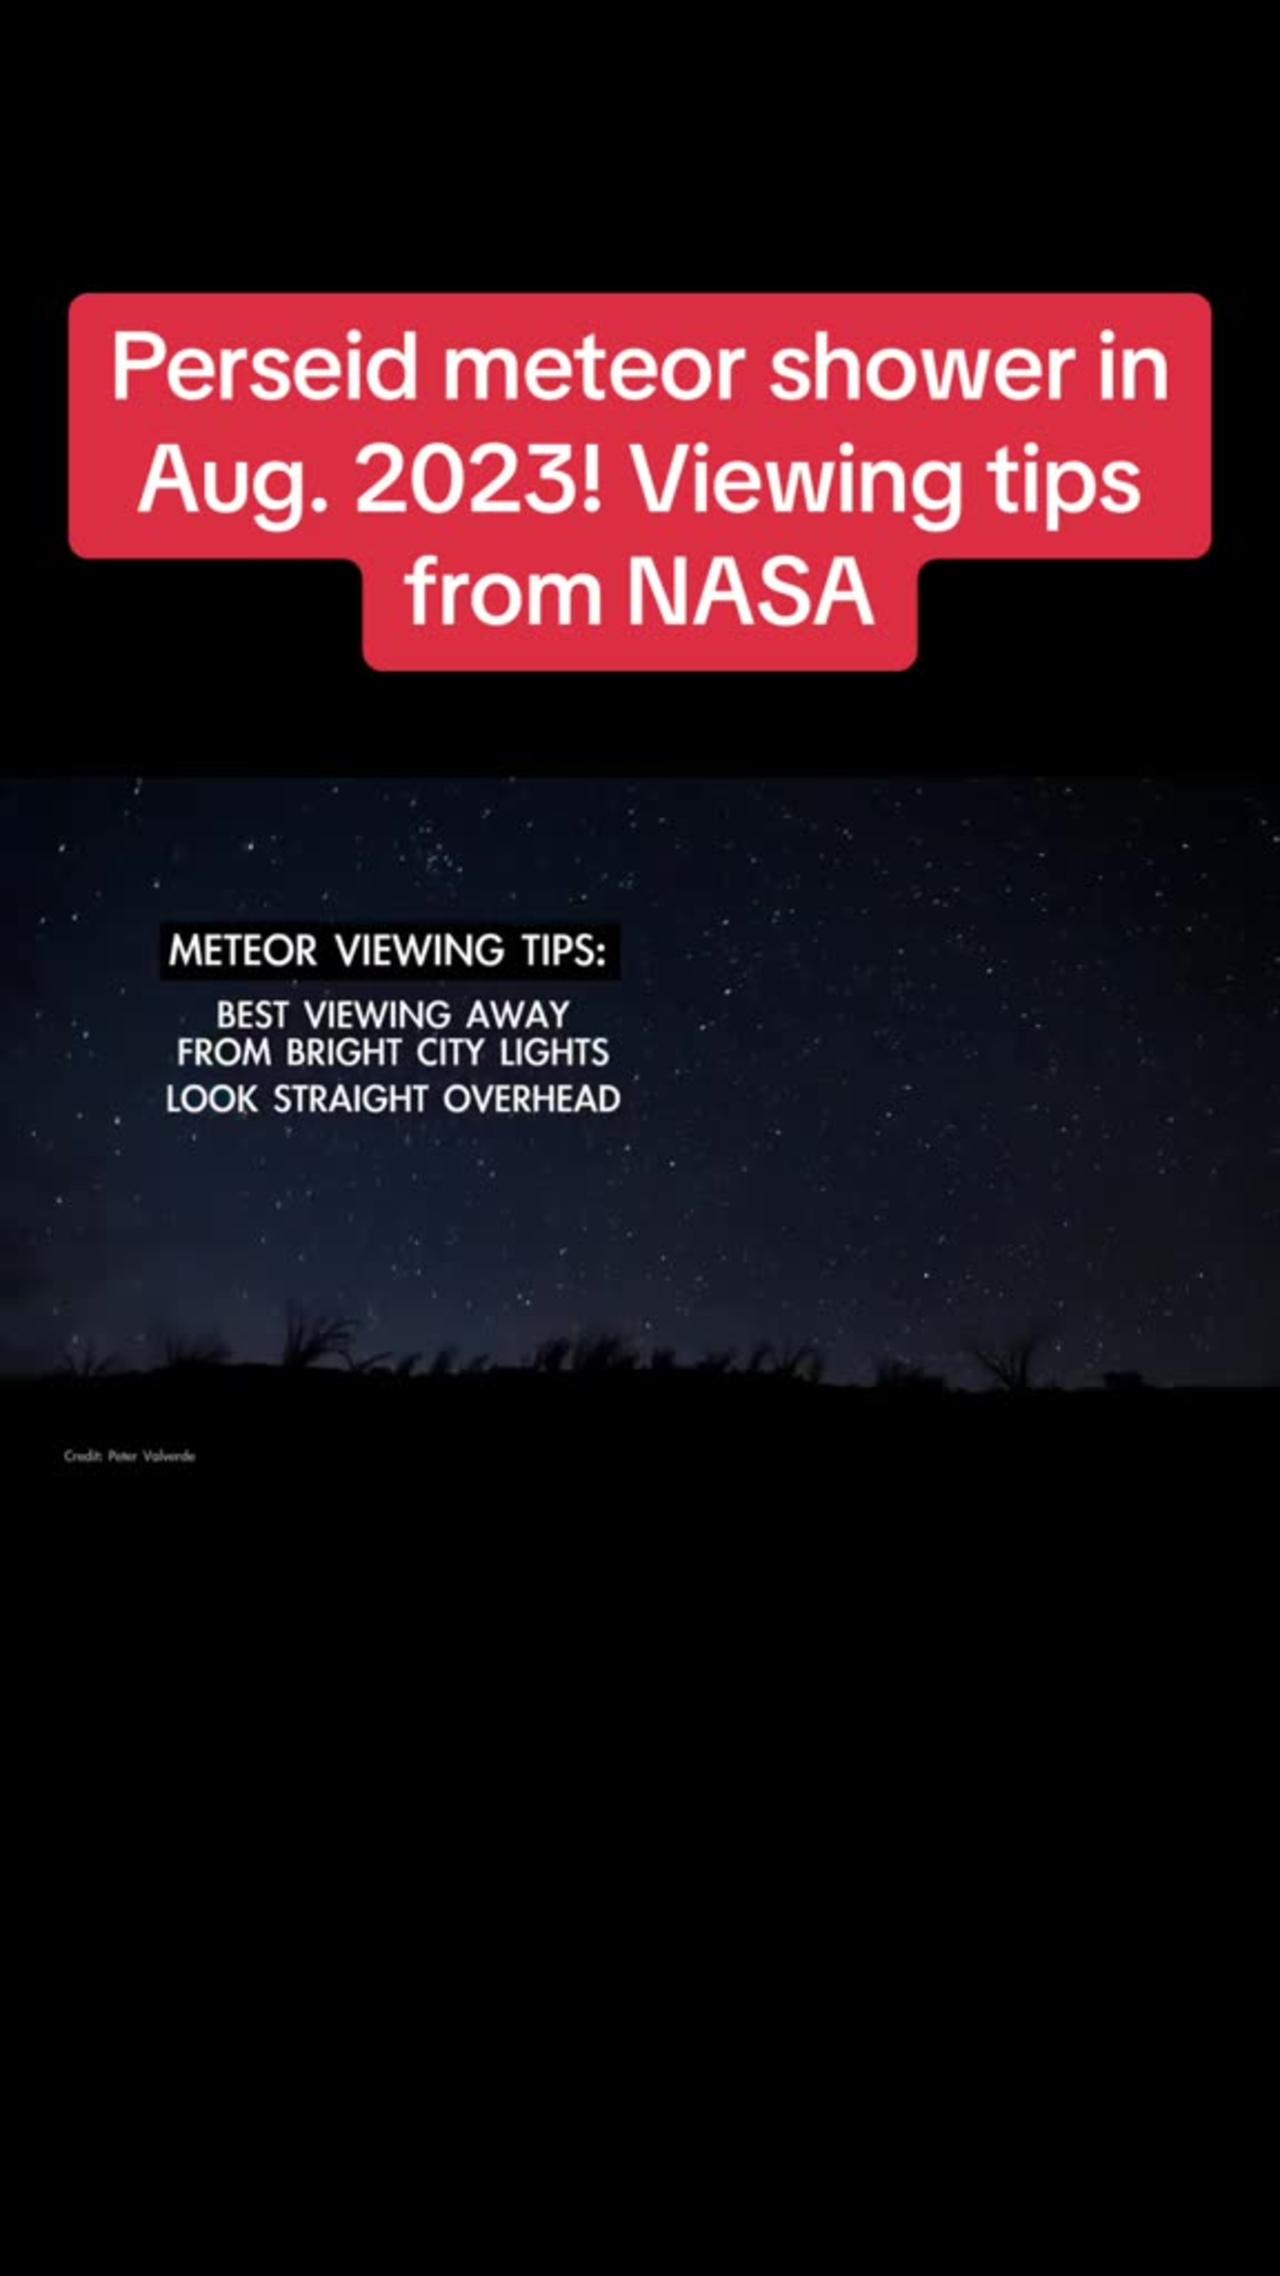 Perseid meteor shower in August 2023 viewing tips from nasa